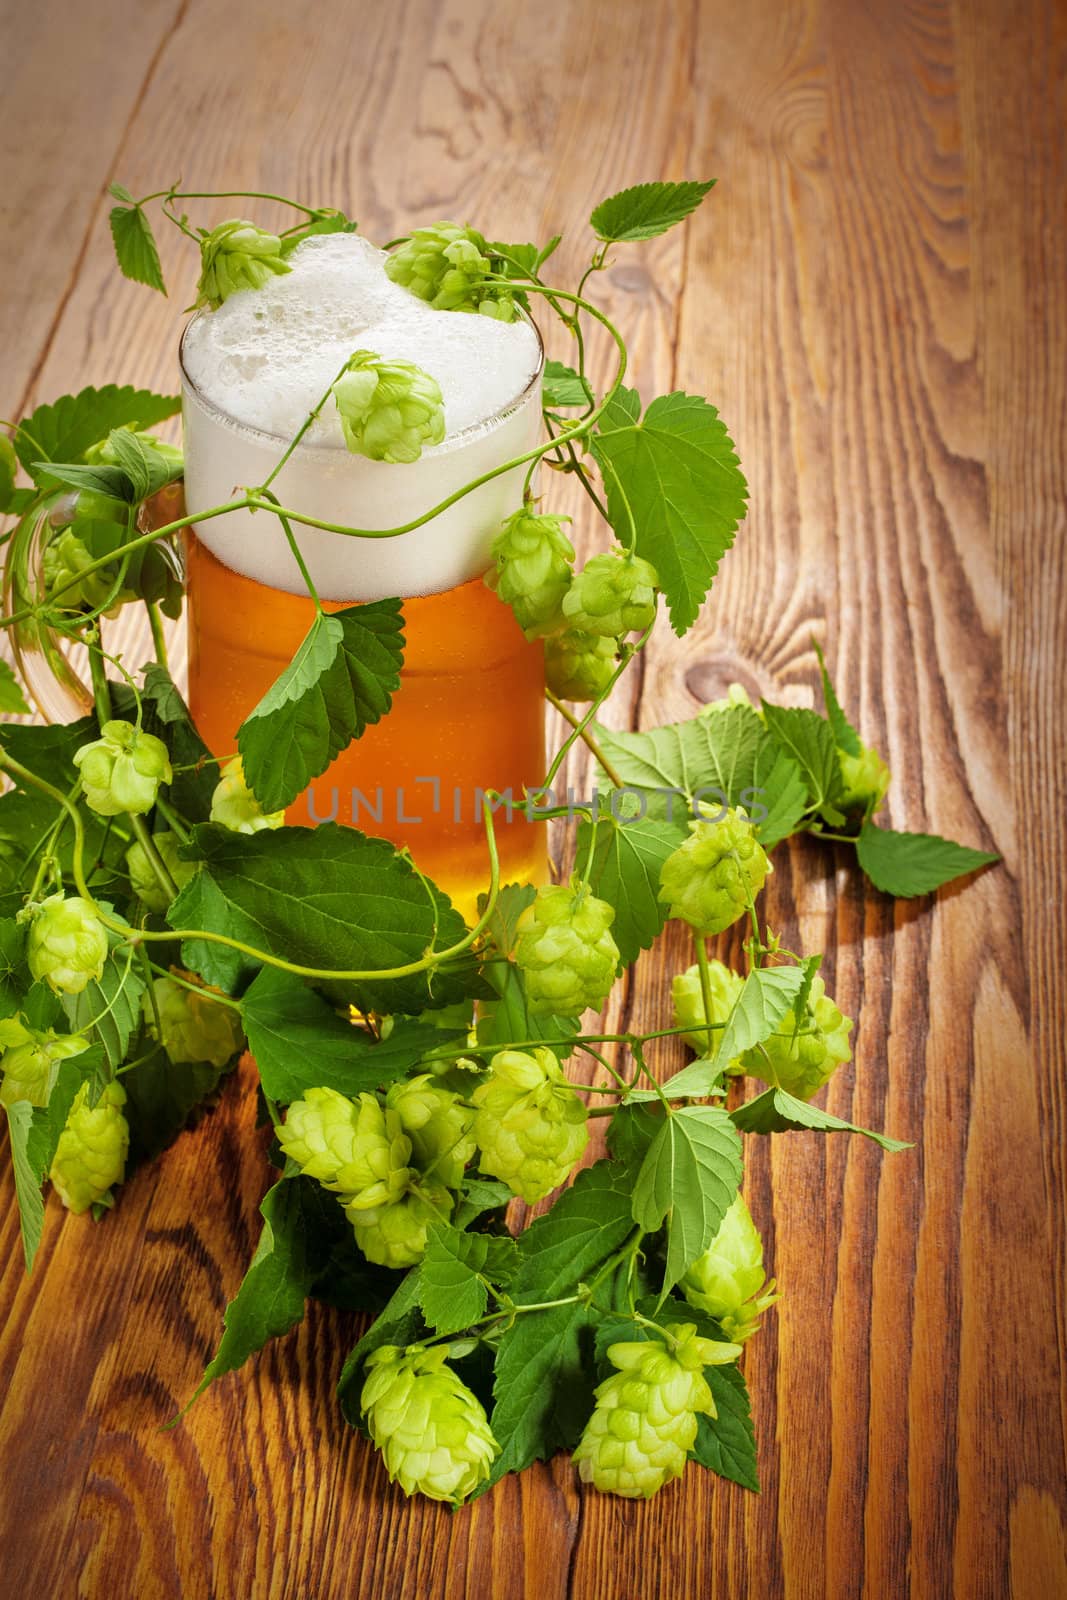 Pint and hop plant by igor_stramyk